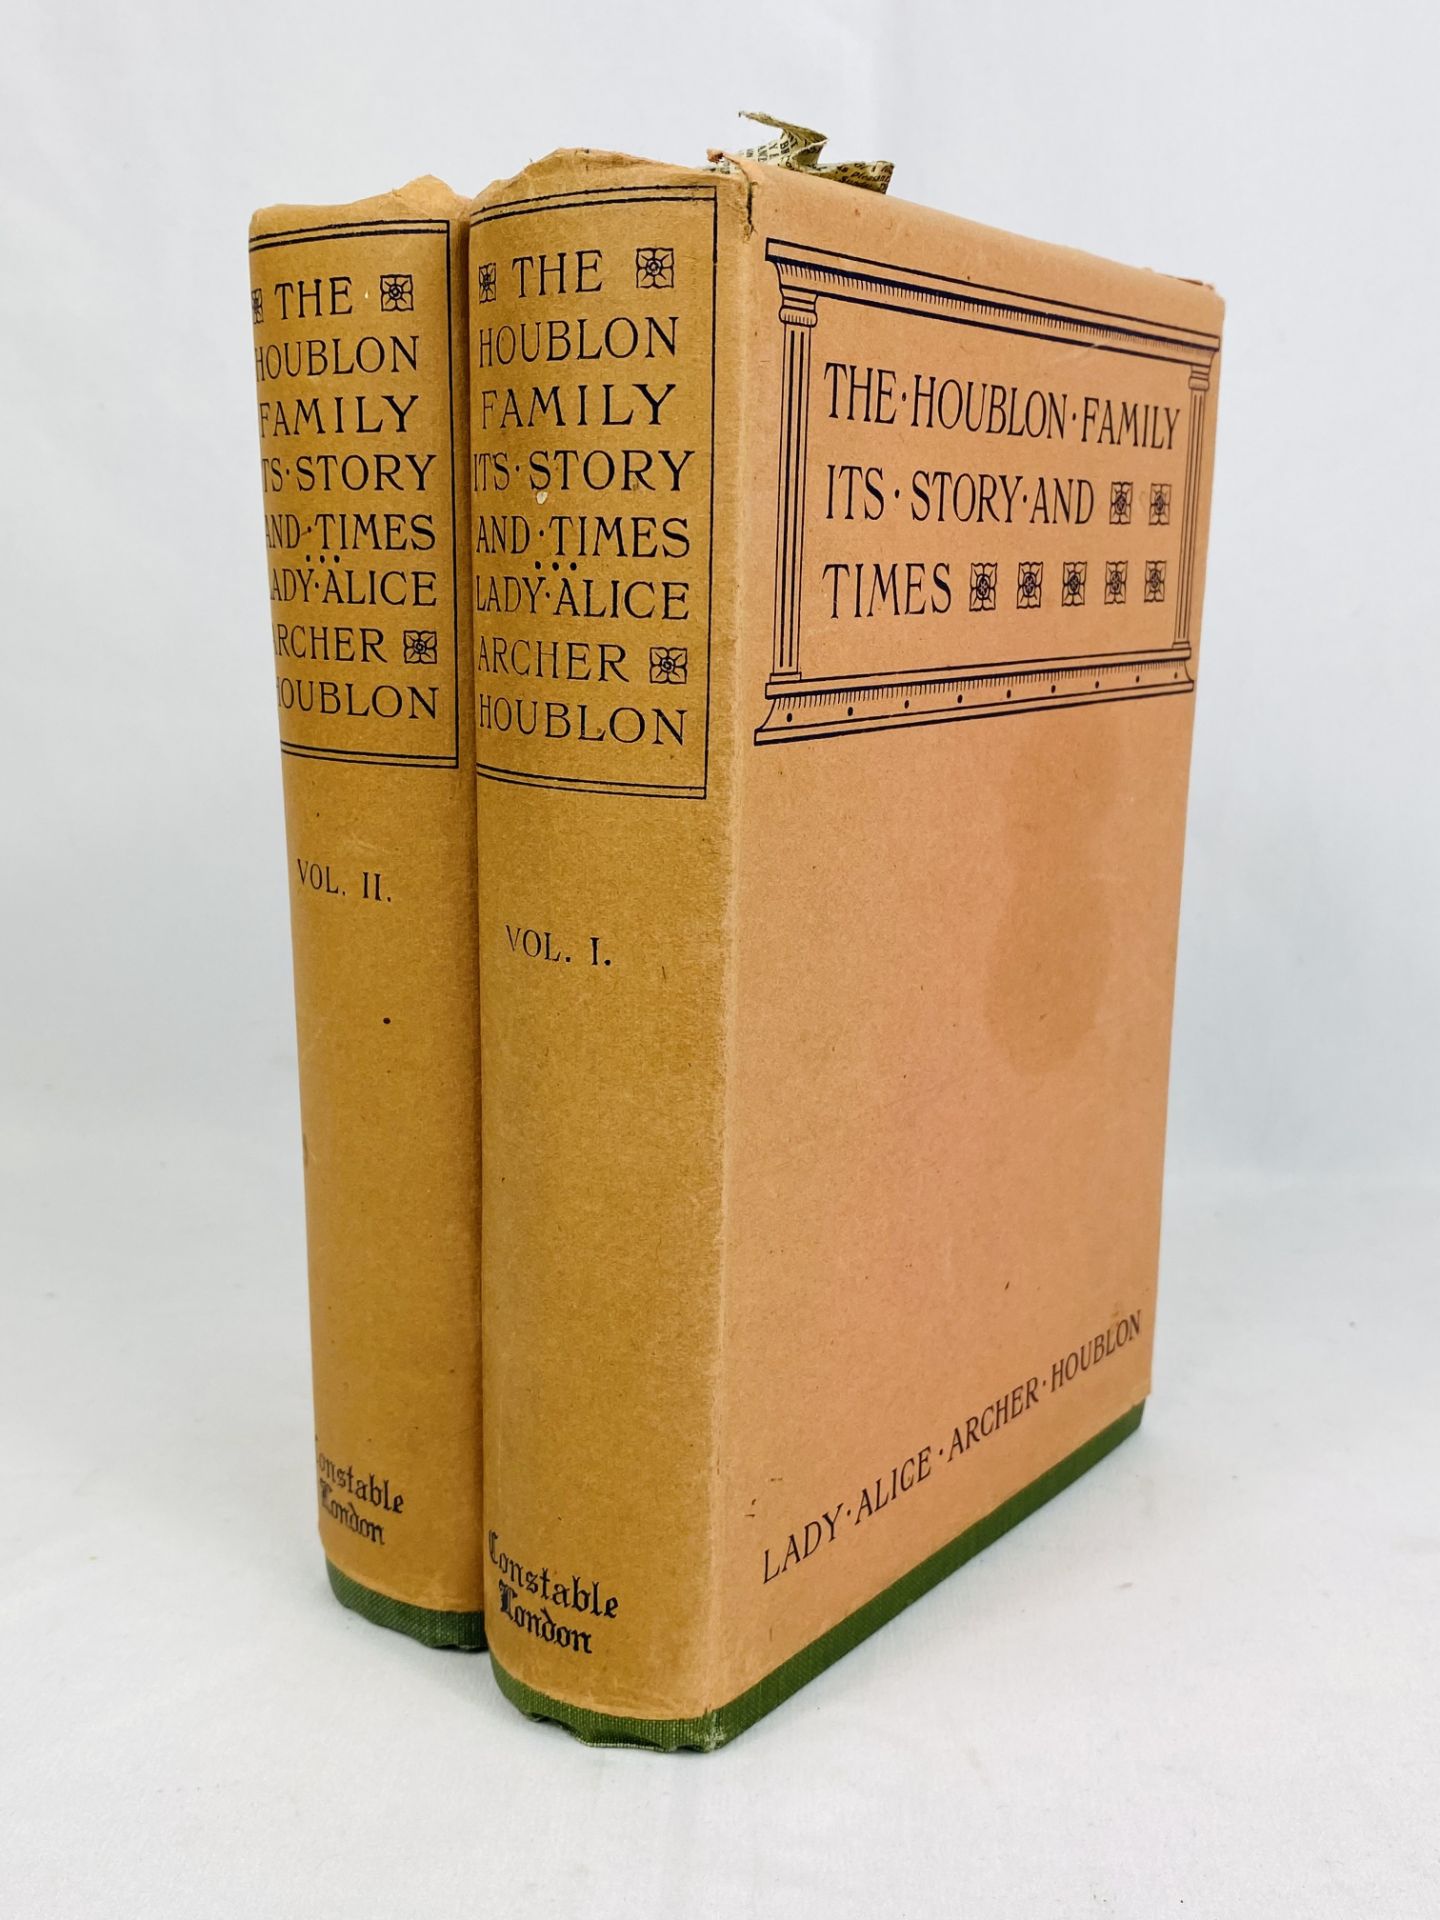 The Houblon Family its Story and Times by Lady Alice Archer Houblon, 1907